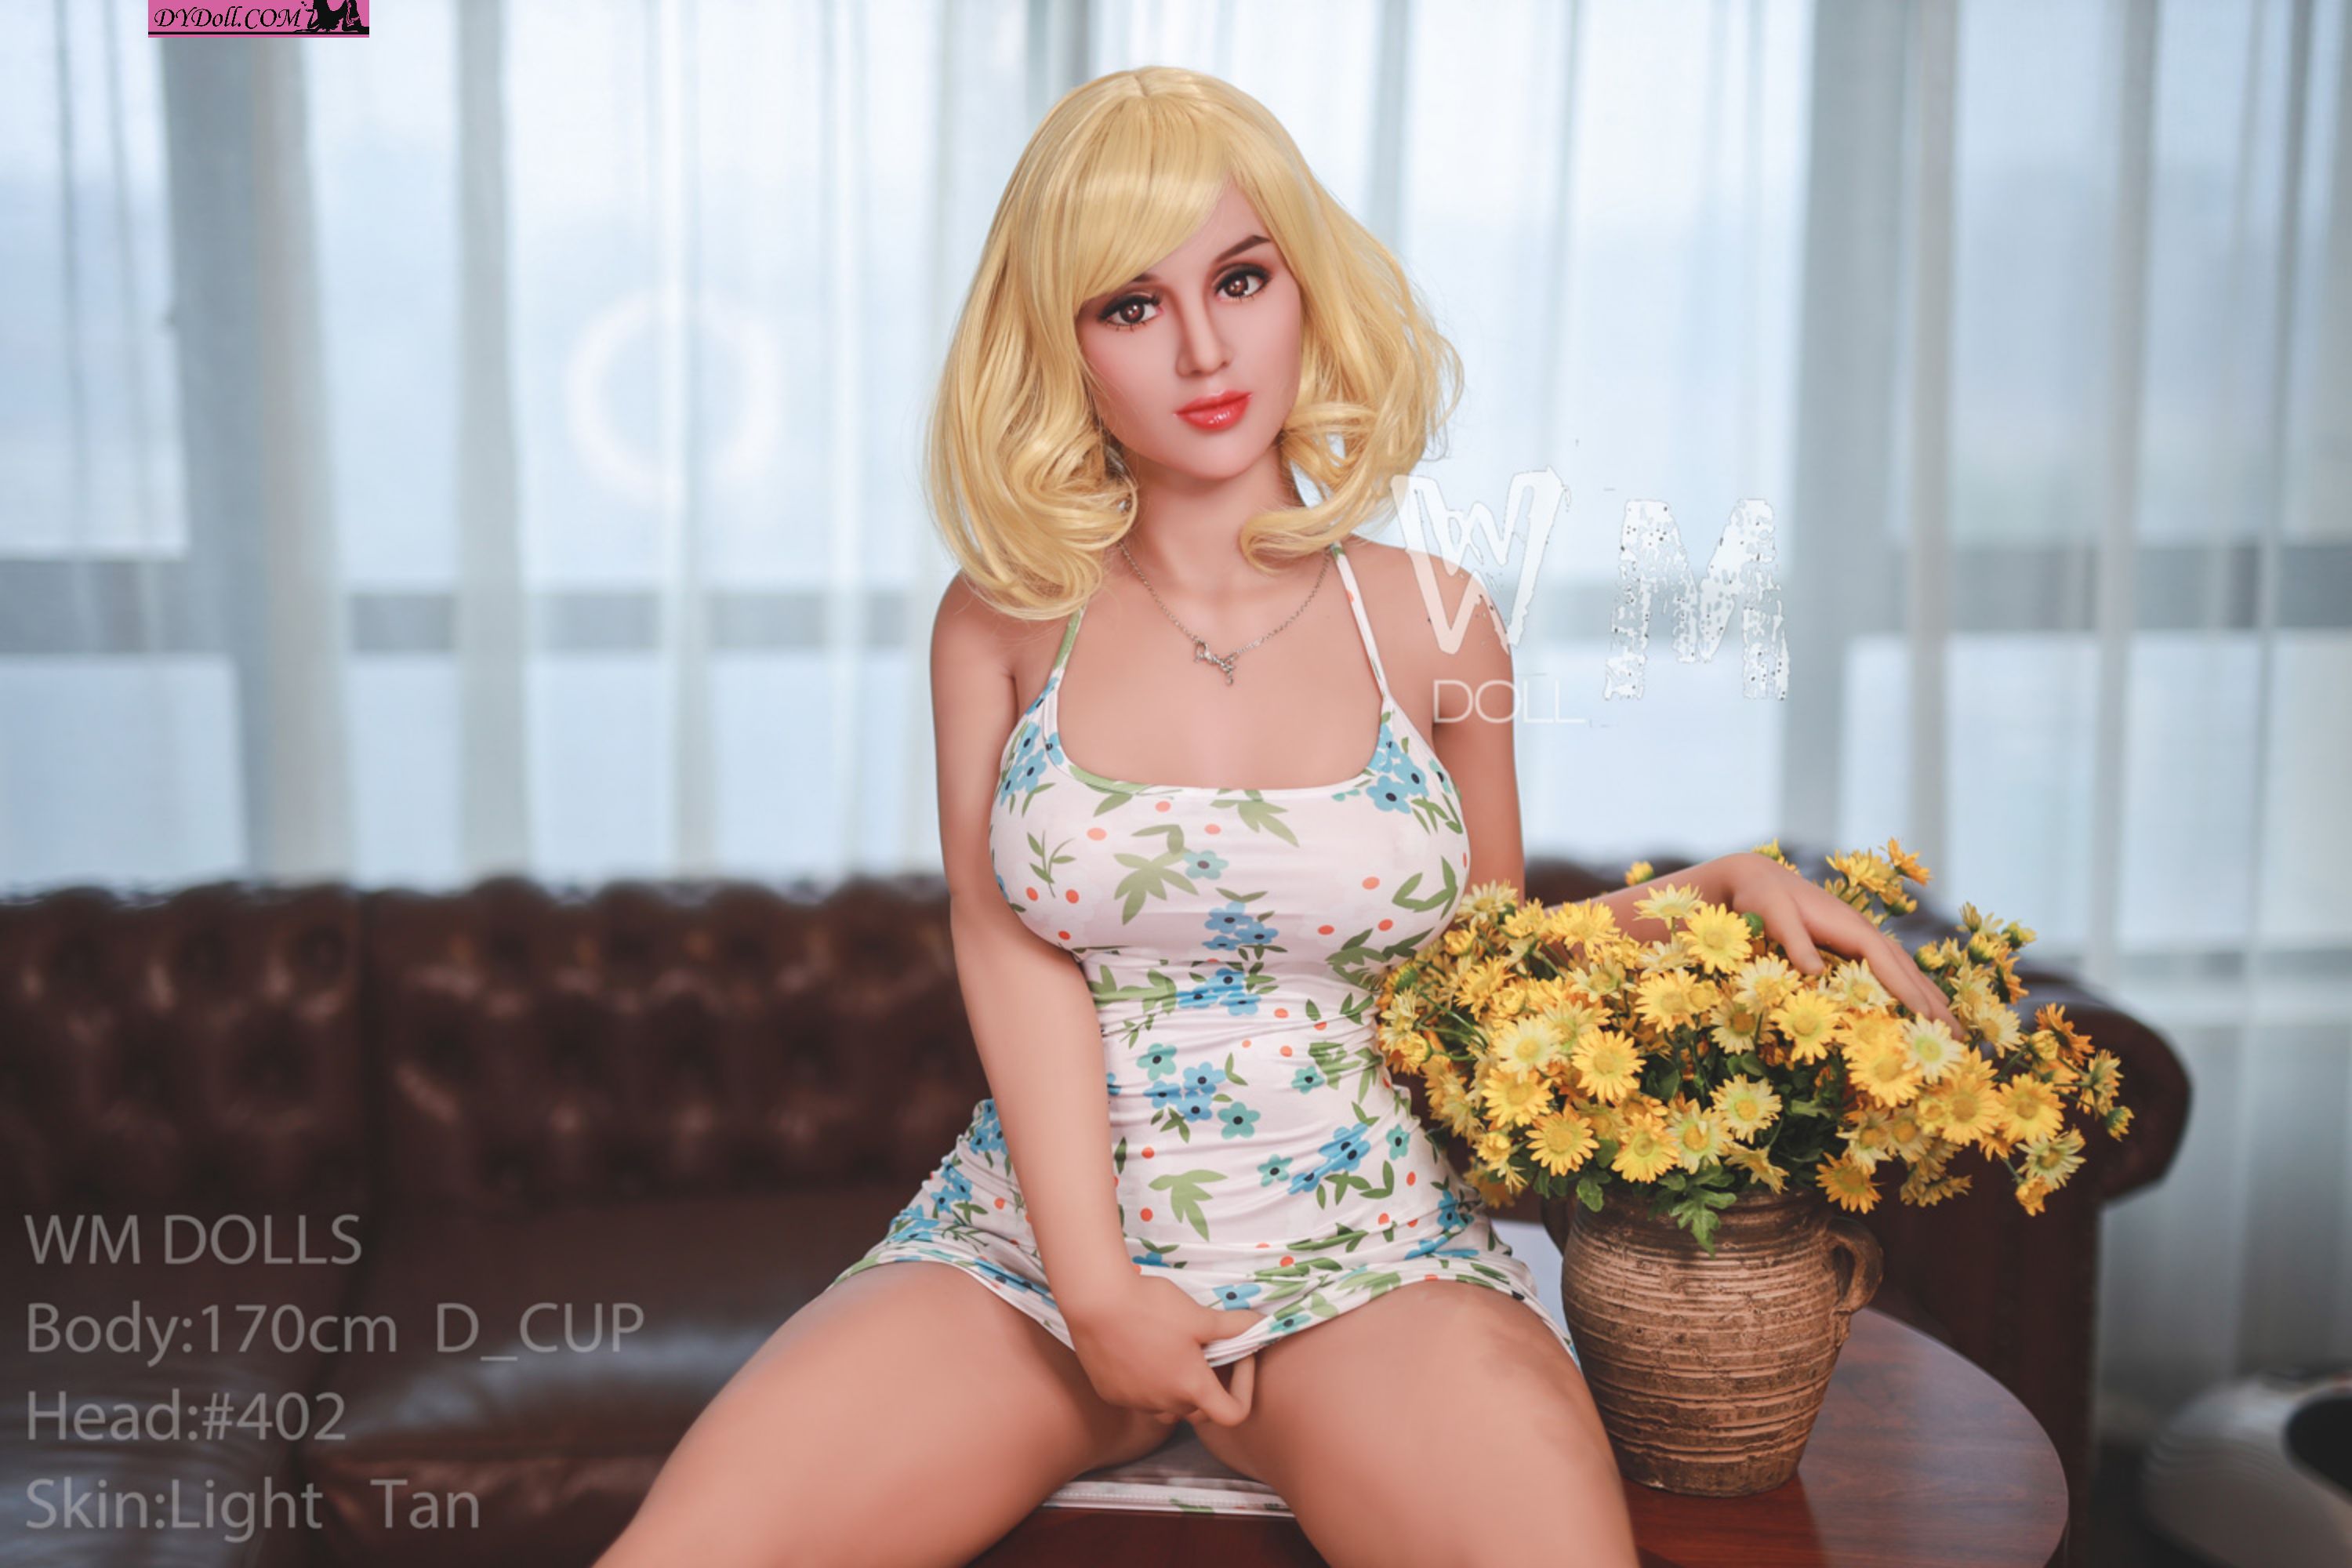 Blonde cute teen sex doll toy with big boobs